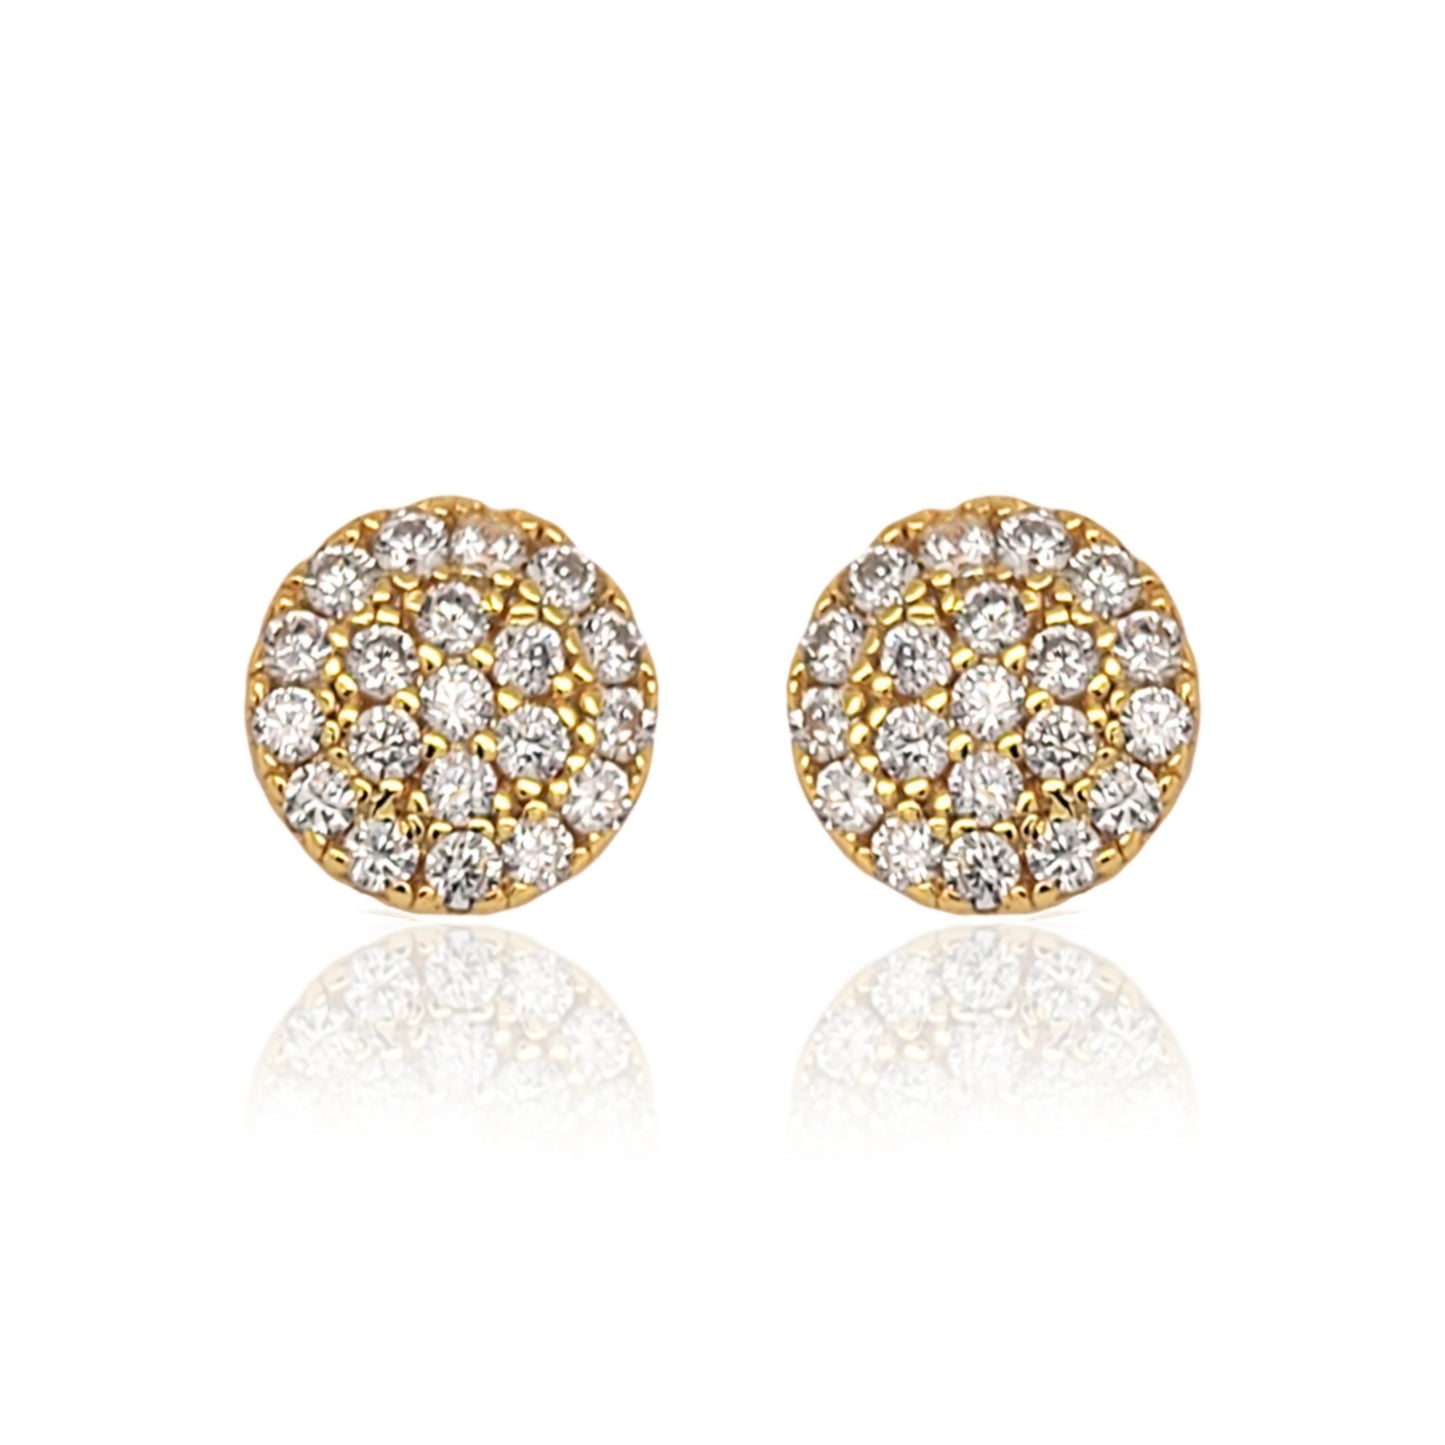 Sterling Silver Round Micropave Stud Earrings - HK Jewels